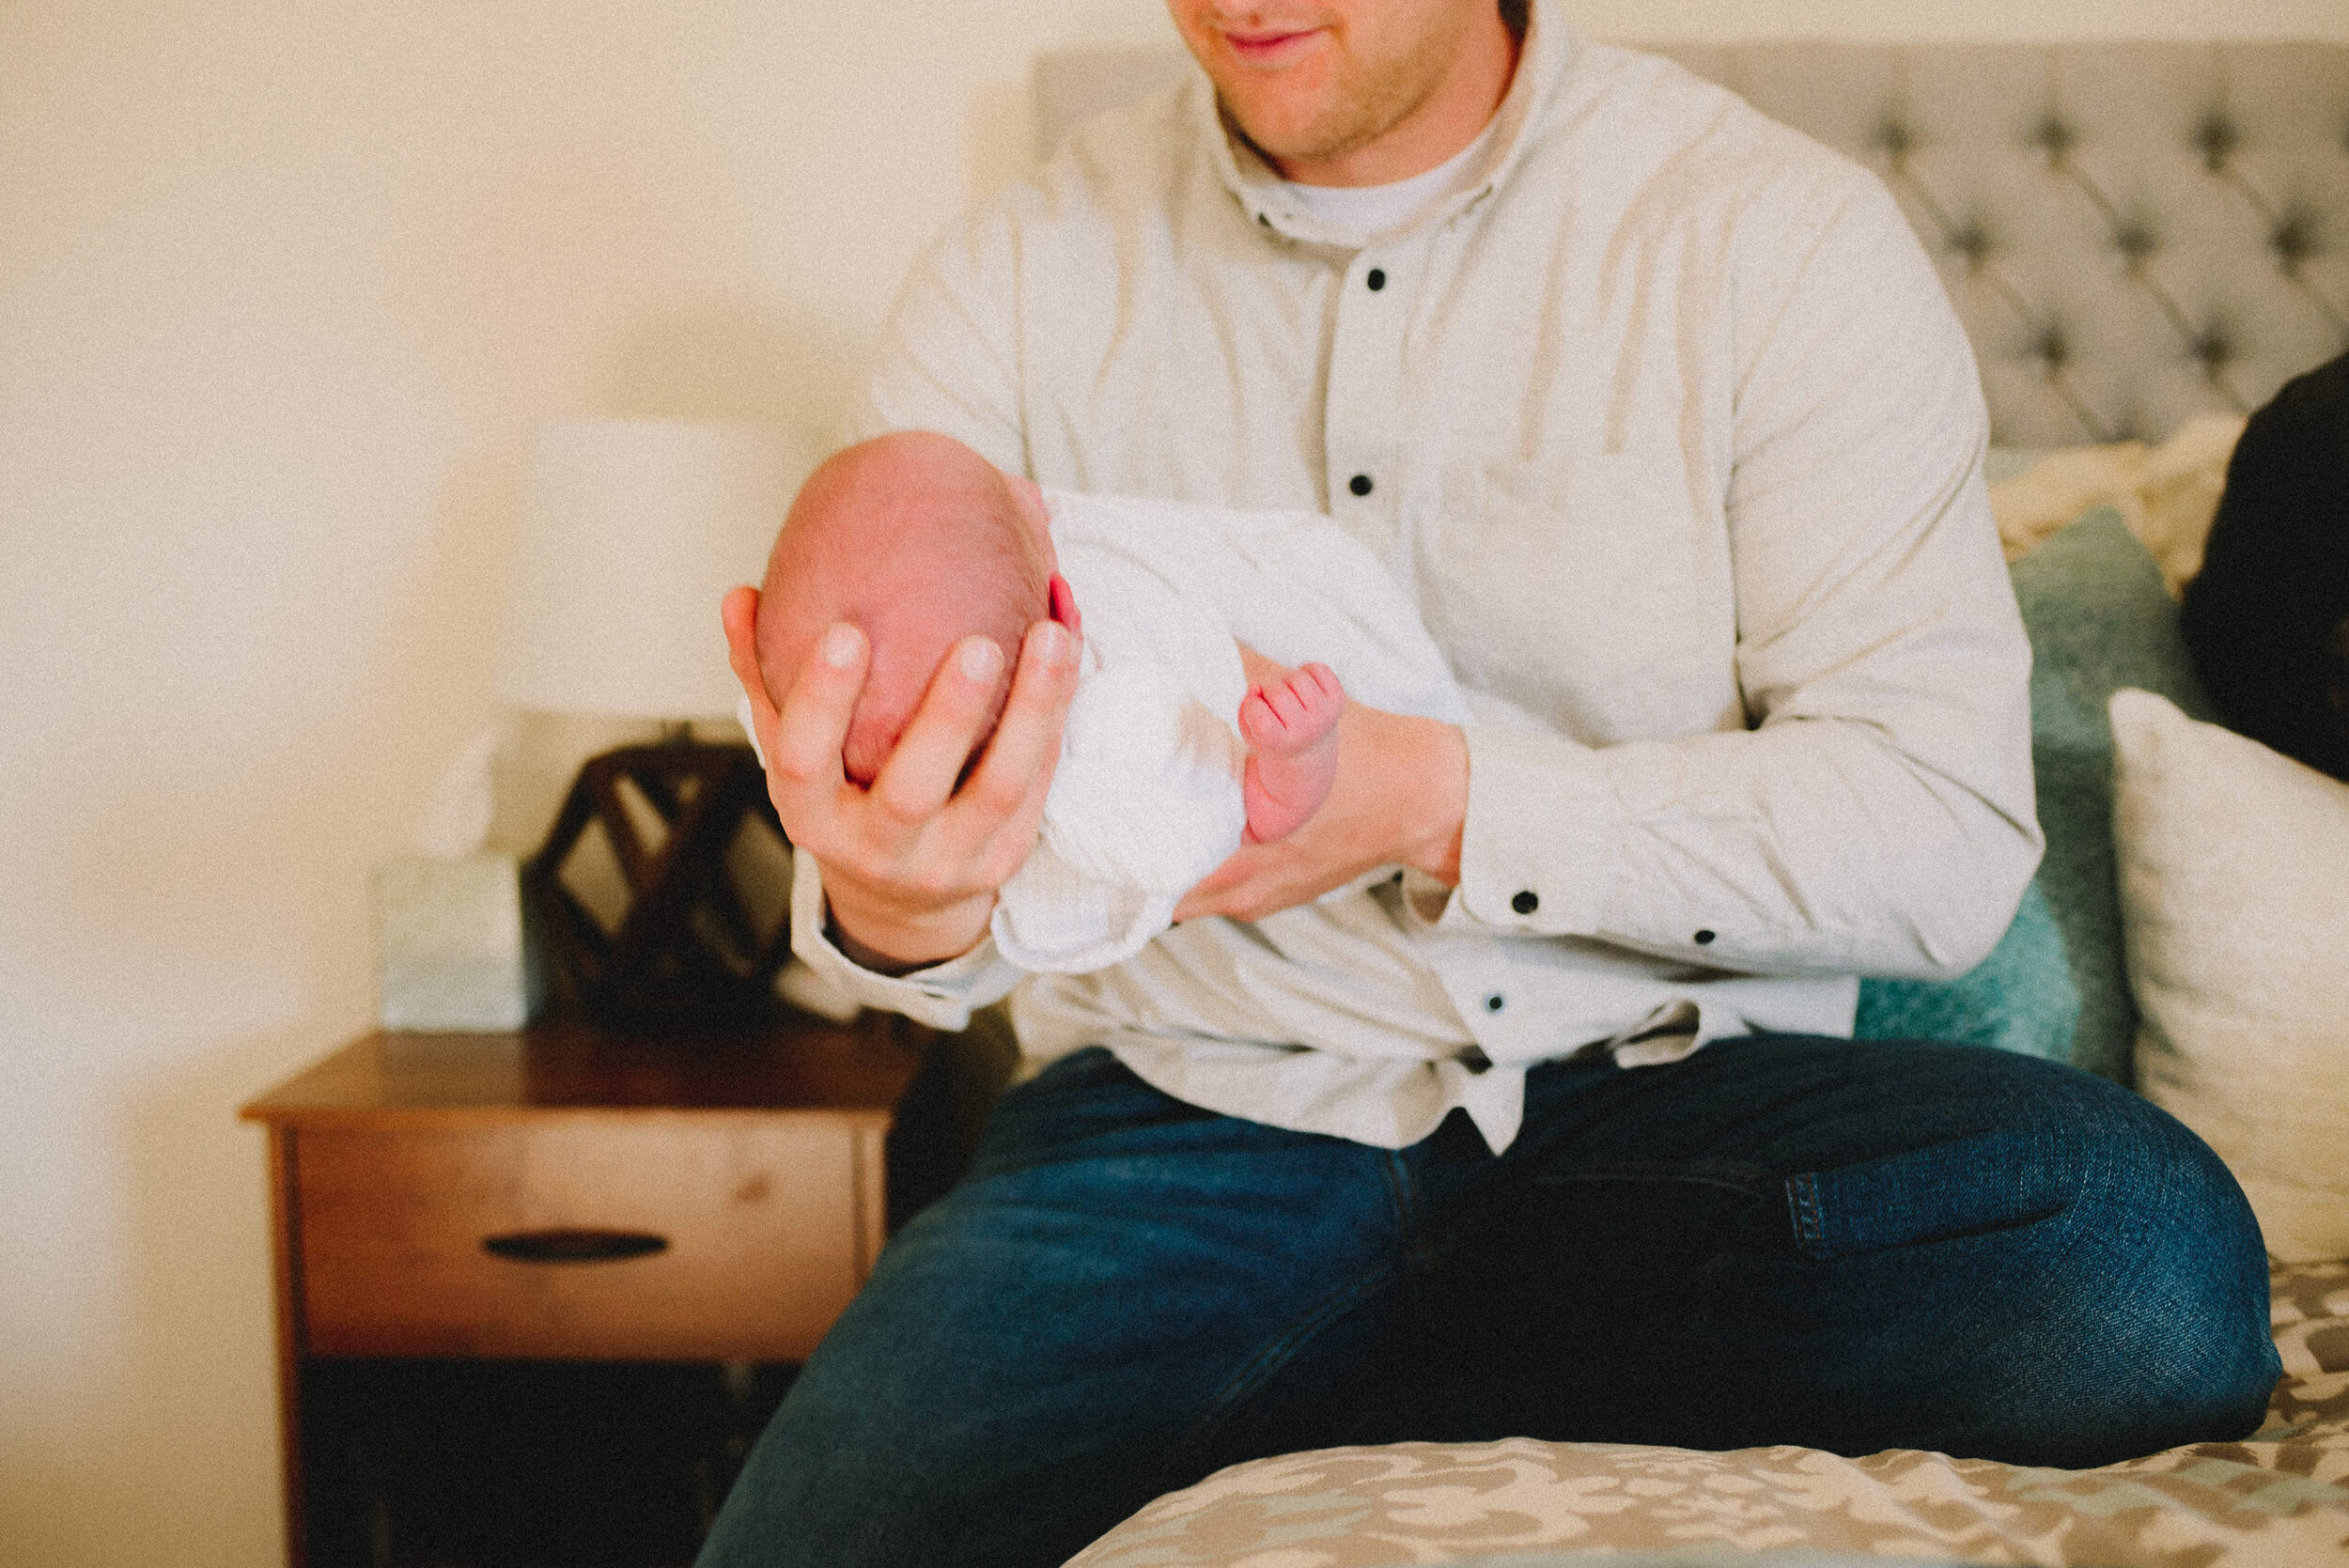 in-home-lifestyle-newborn-session-anchorage-alaska-photographer-way-up-north-photography (64).jpg